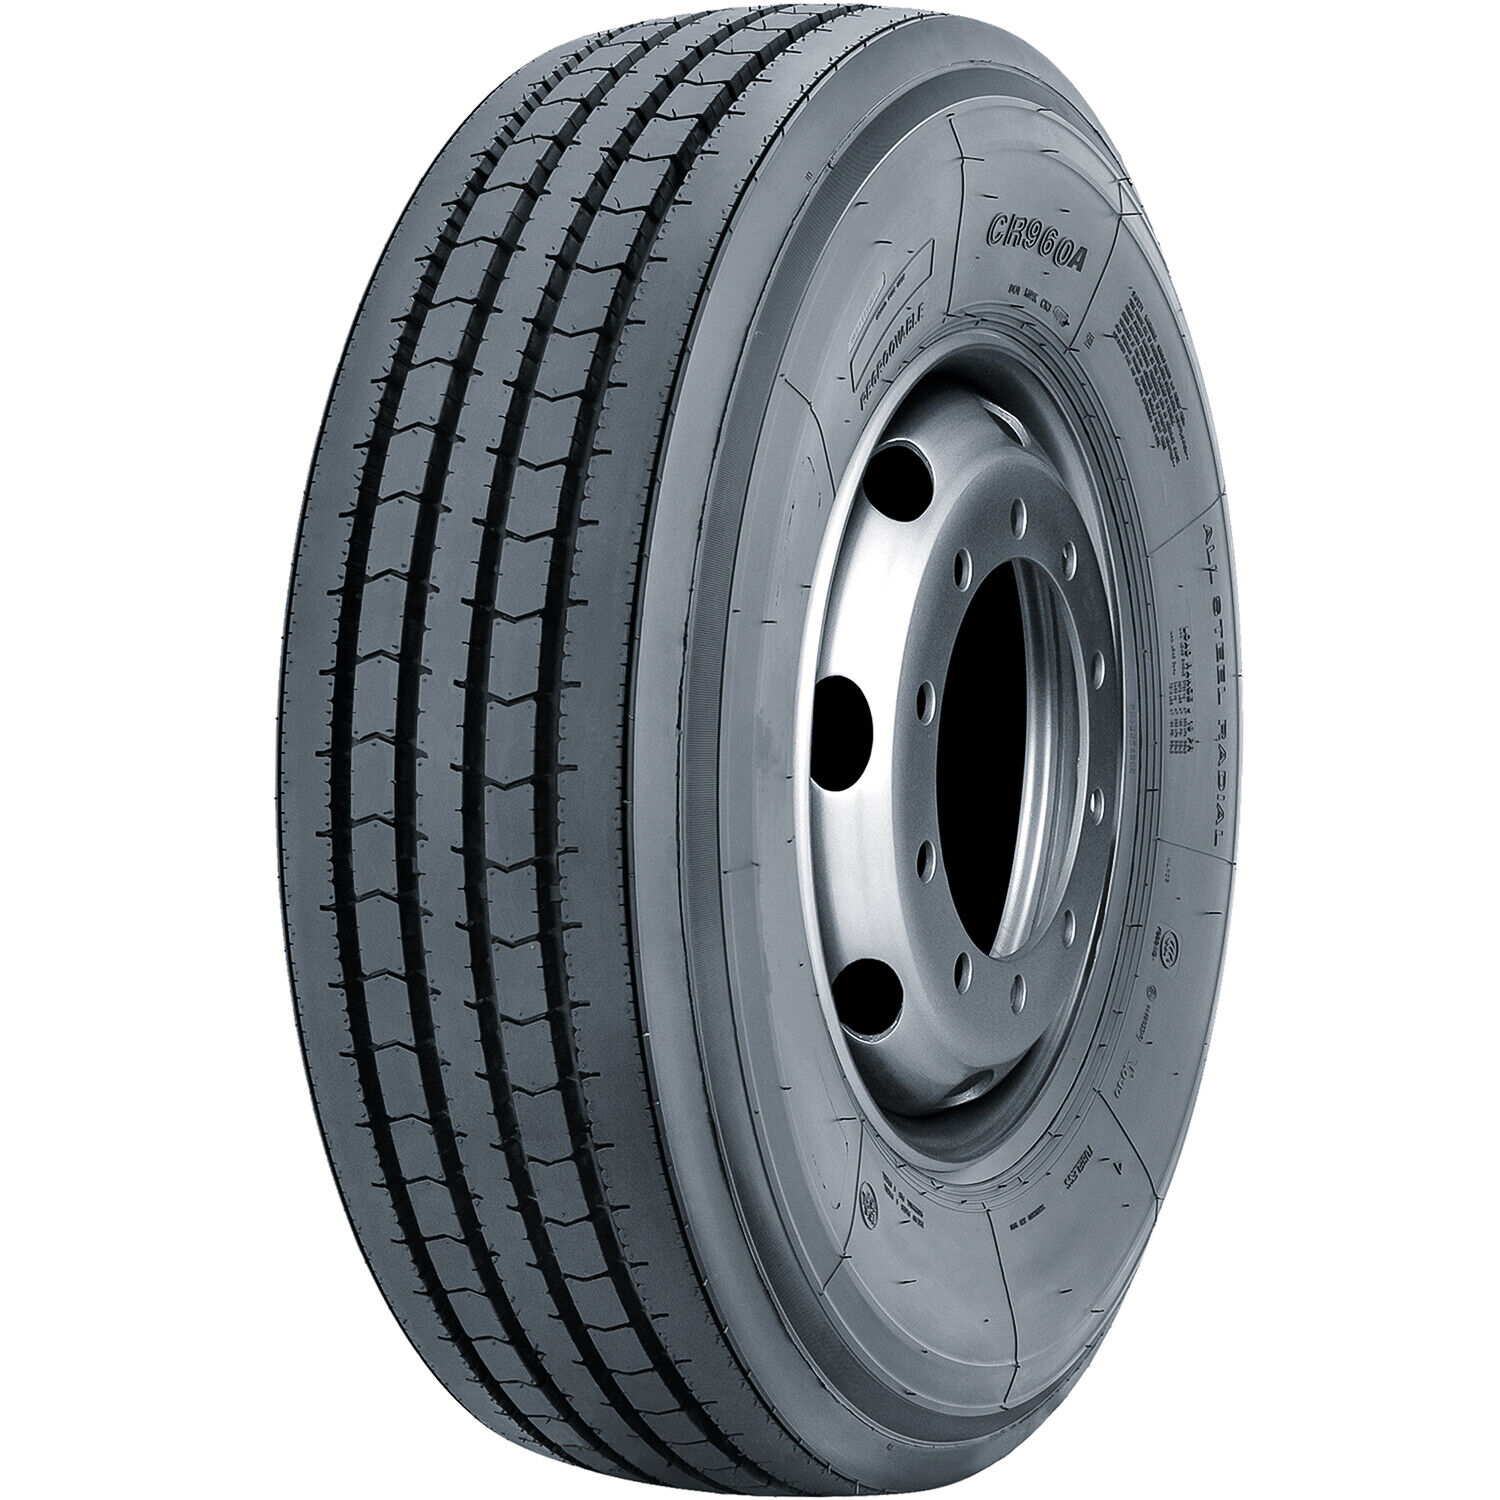 Tire Westlake CR960A ST 235/80R16 Load G 14 Ply Trailer